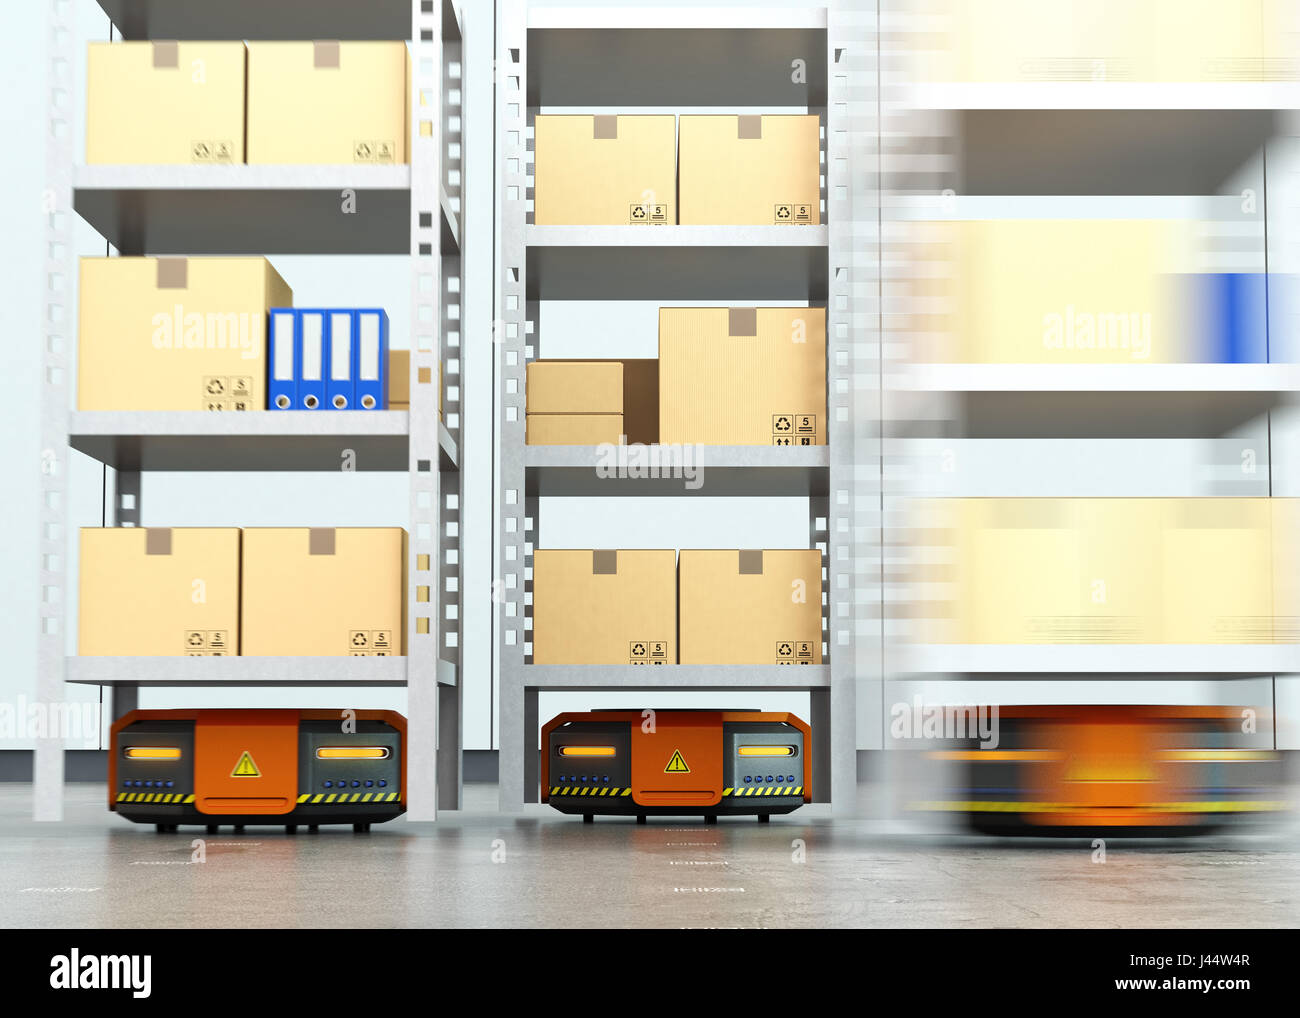 Orange robots carrying pallets with goods in modern warehouse.  Modern delivery center concept. 3D rendering image. Stock Photo